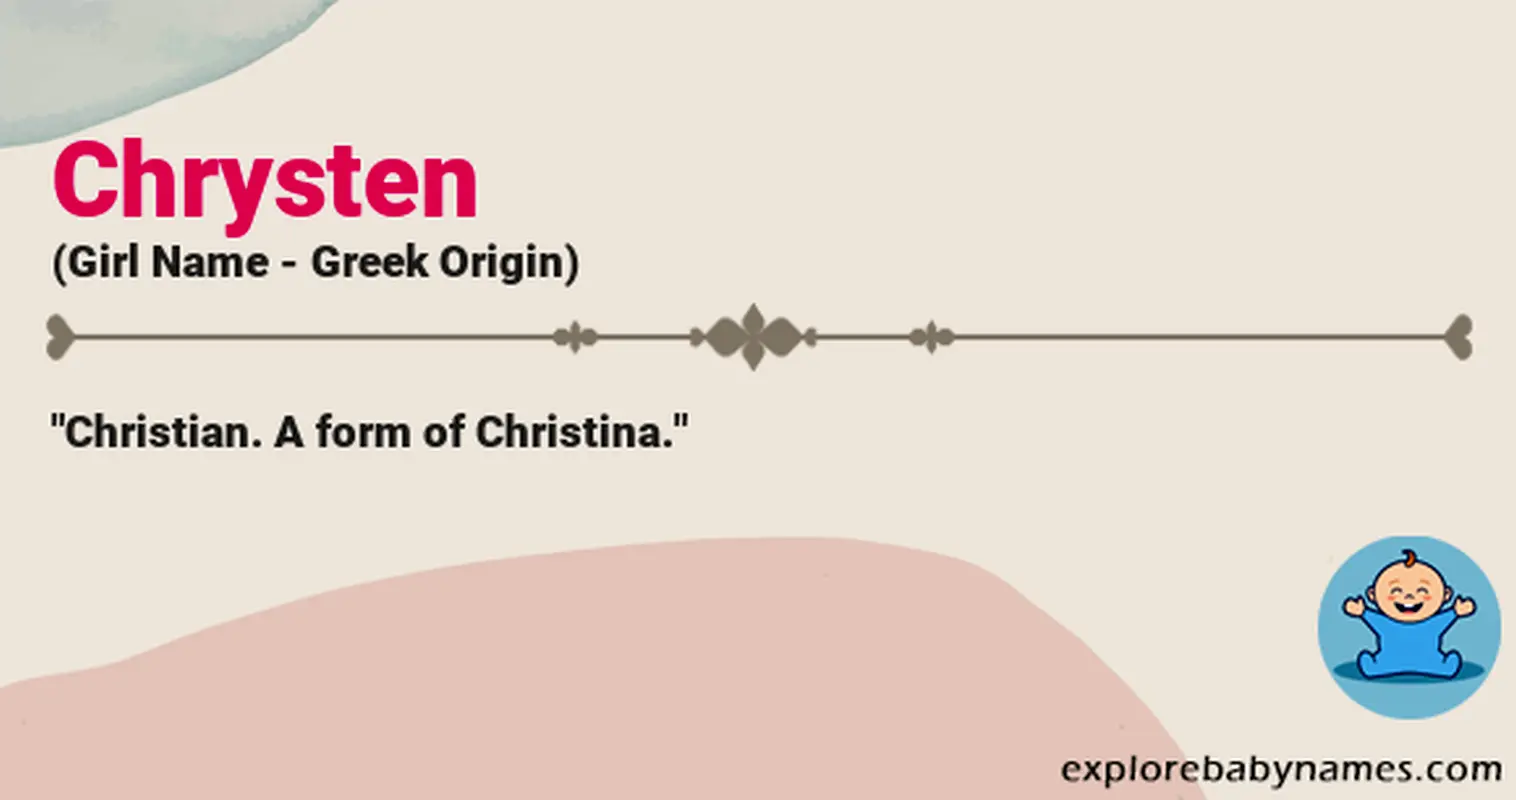 Meaning of Chrysten